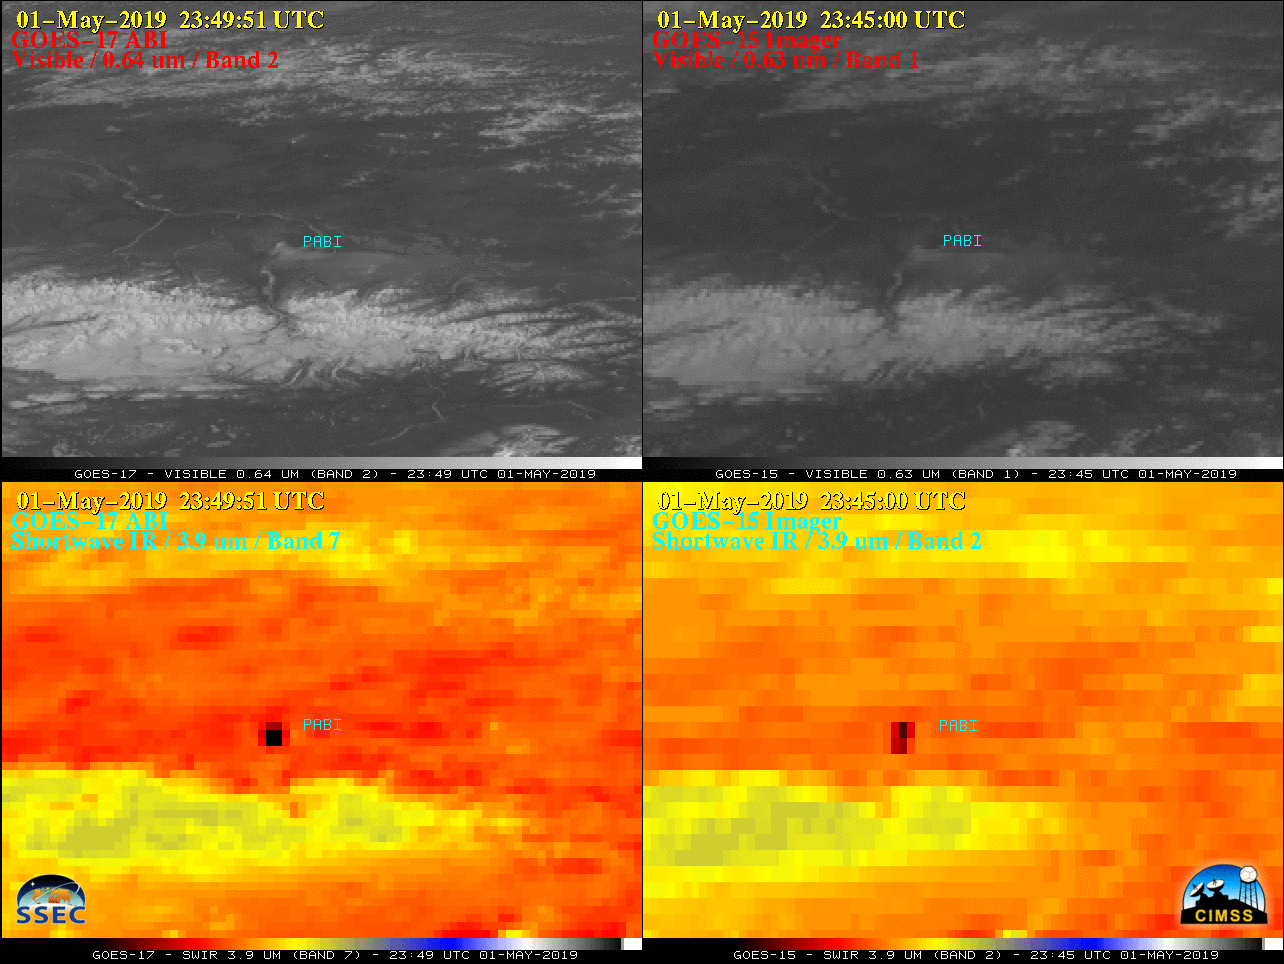 GOES-17 Visible (0.64 µm, top left), GOES-15 Visible (0.63 µm, top right), GOES-17 Shortwave Infrared (3.9 µm, bottom left) and GOES-15 Shortwave Infrared (3.9 µm, bottom right) images [click to play animation | MP4]